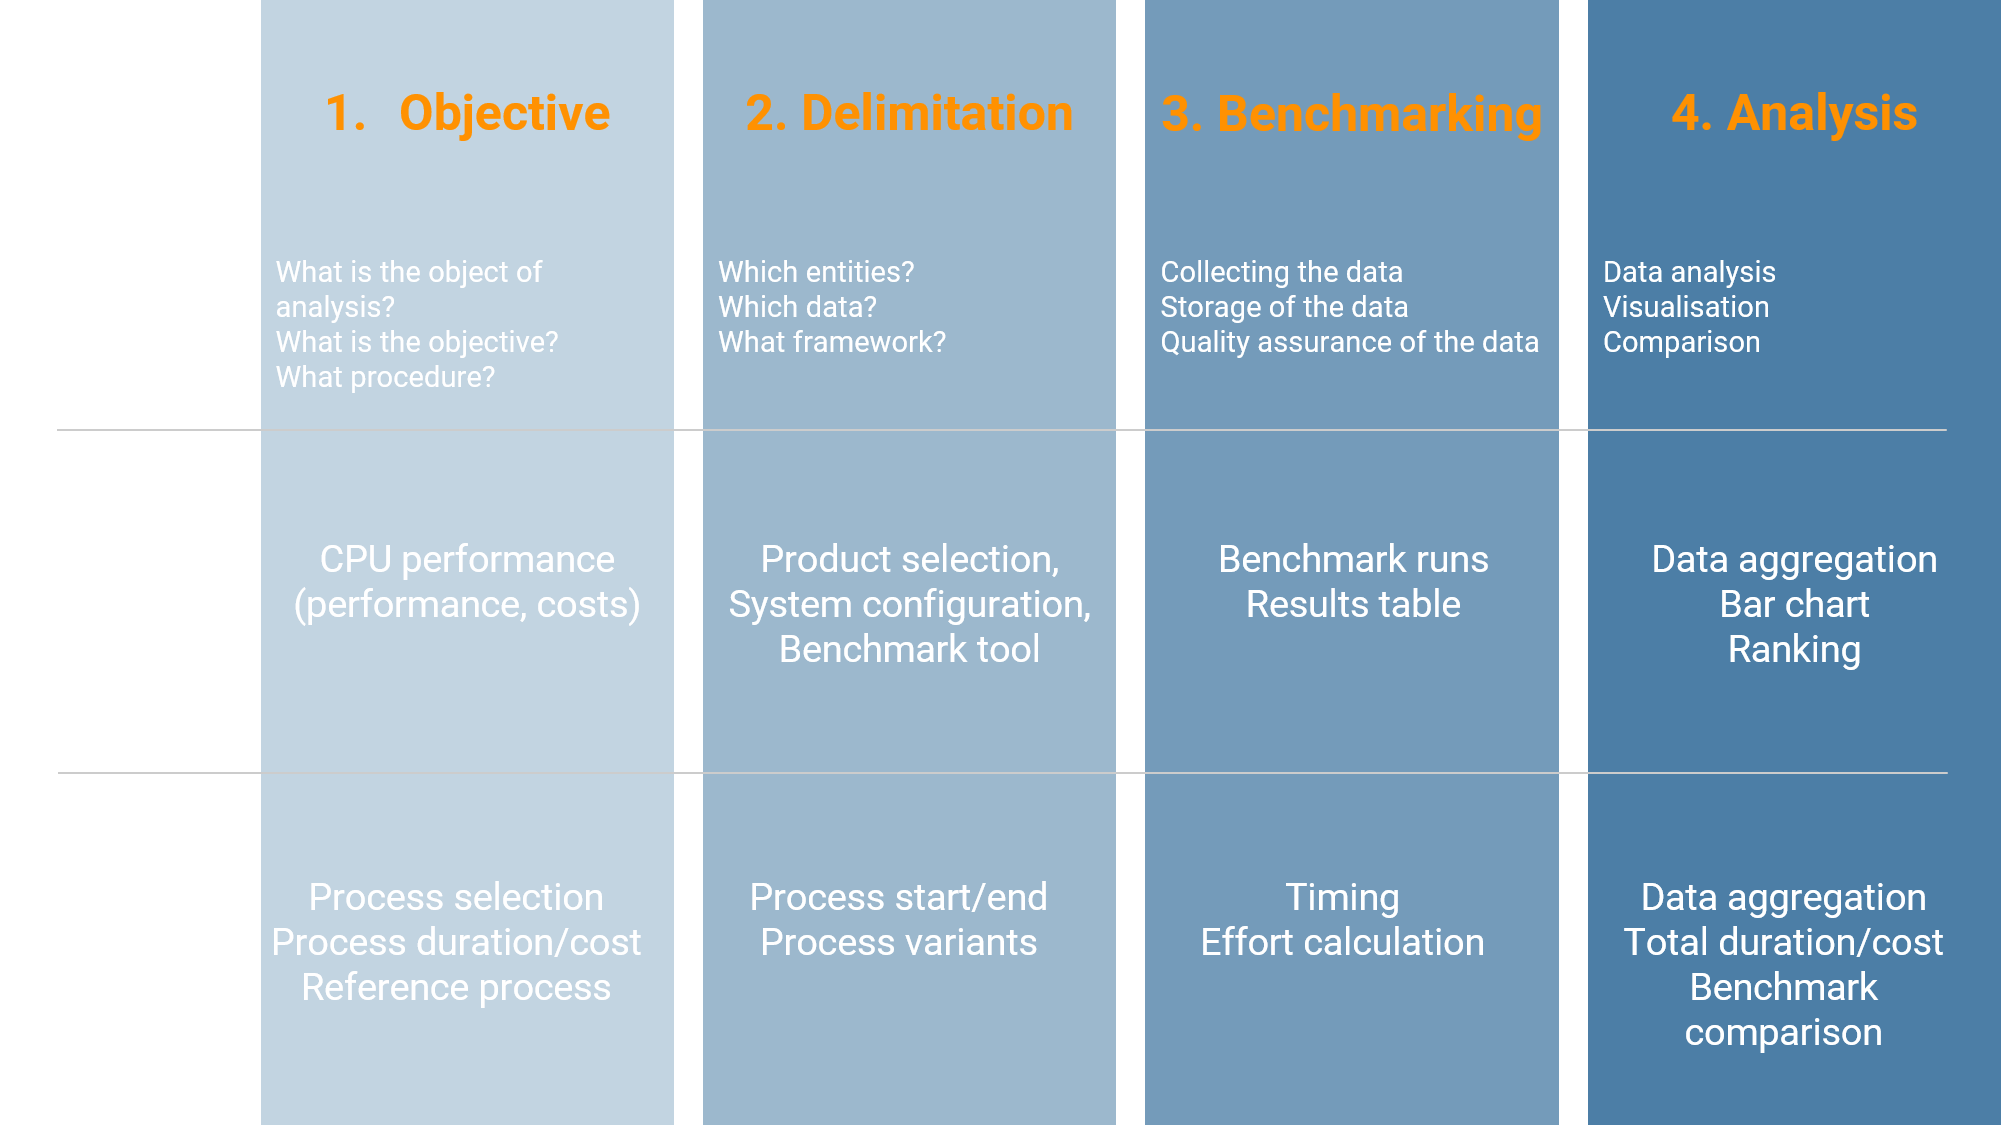 General benchmarking process with examples